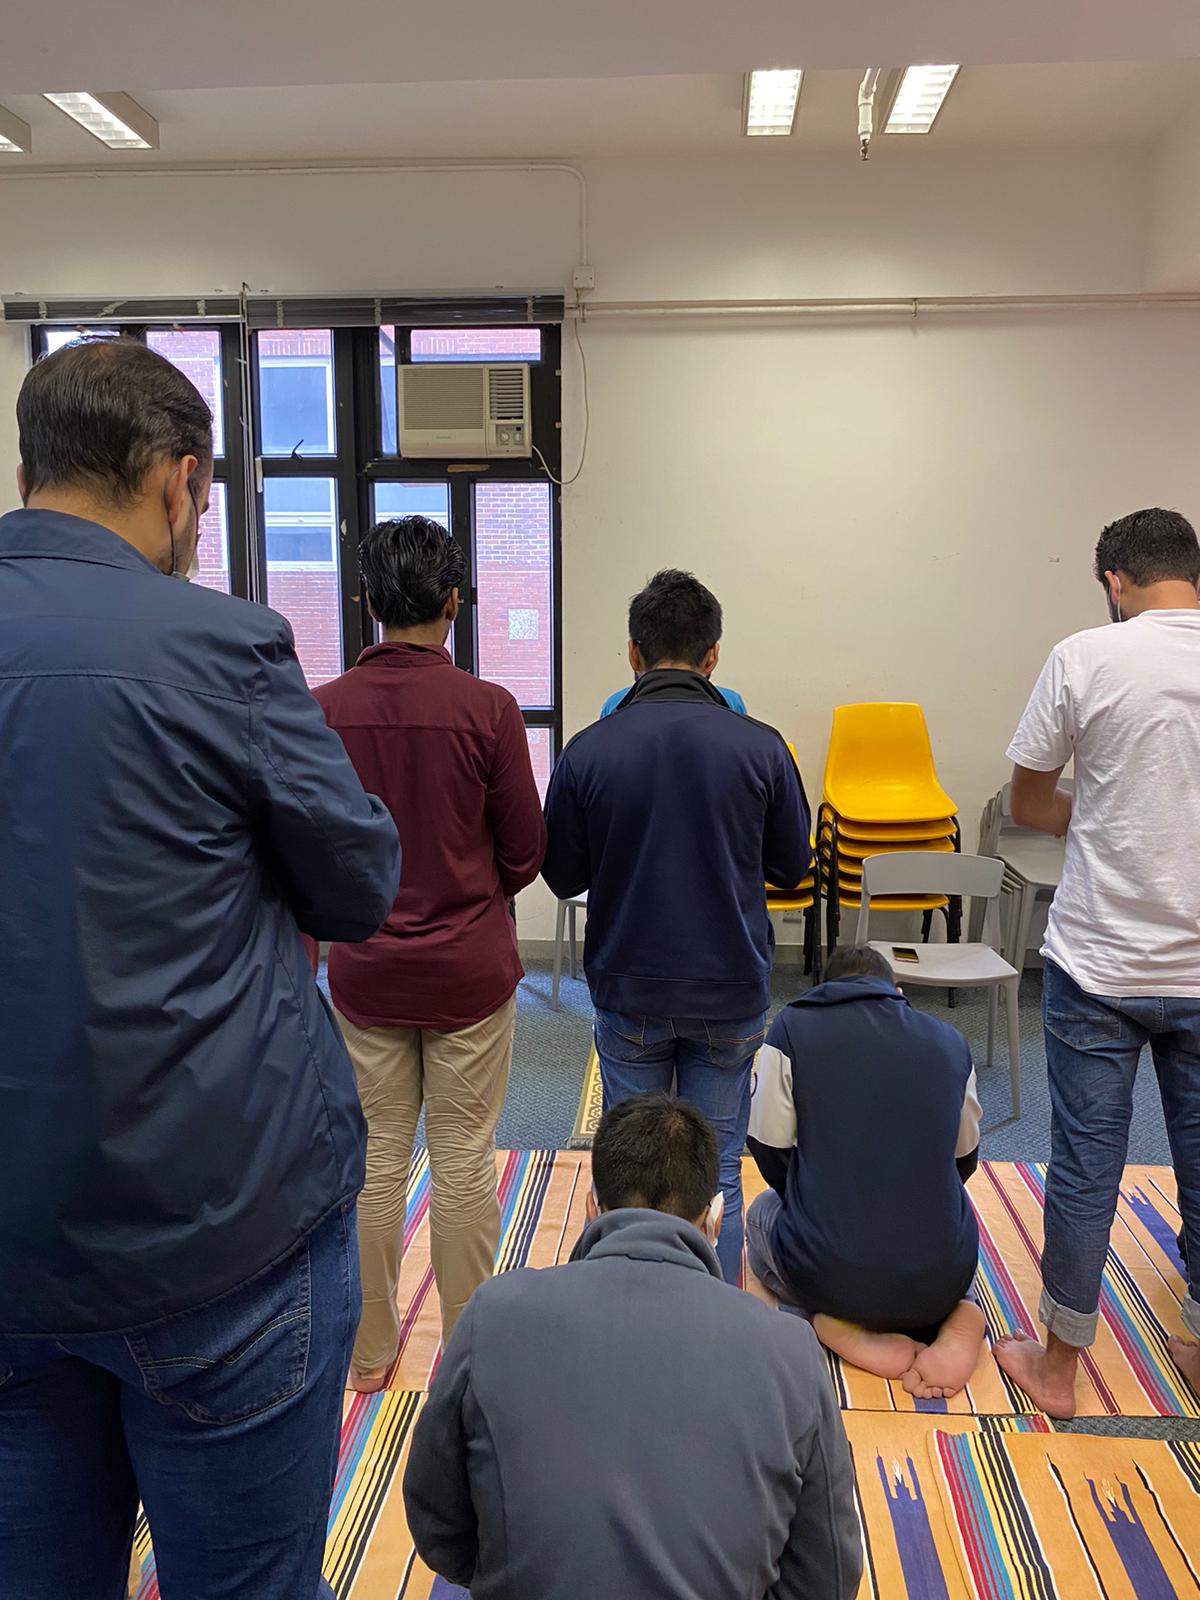 Students are participating in a weekly prayer session.